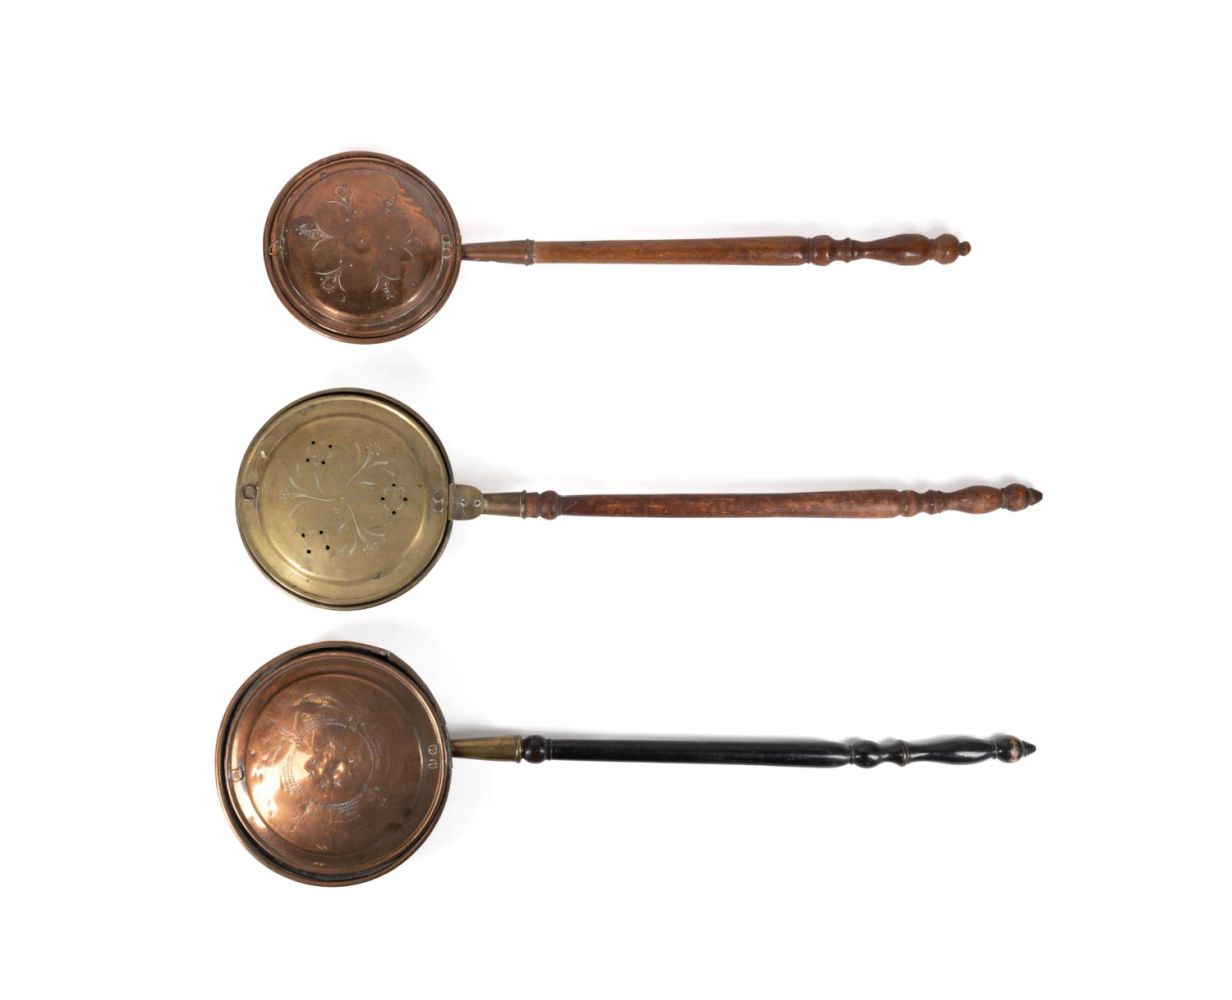 THREE BRASS AND COPPER BED WARMING PANS